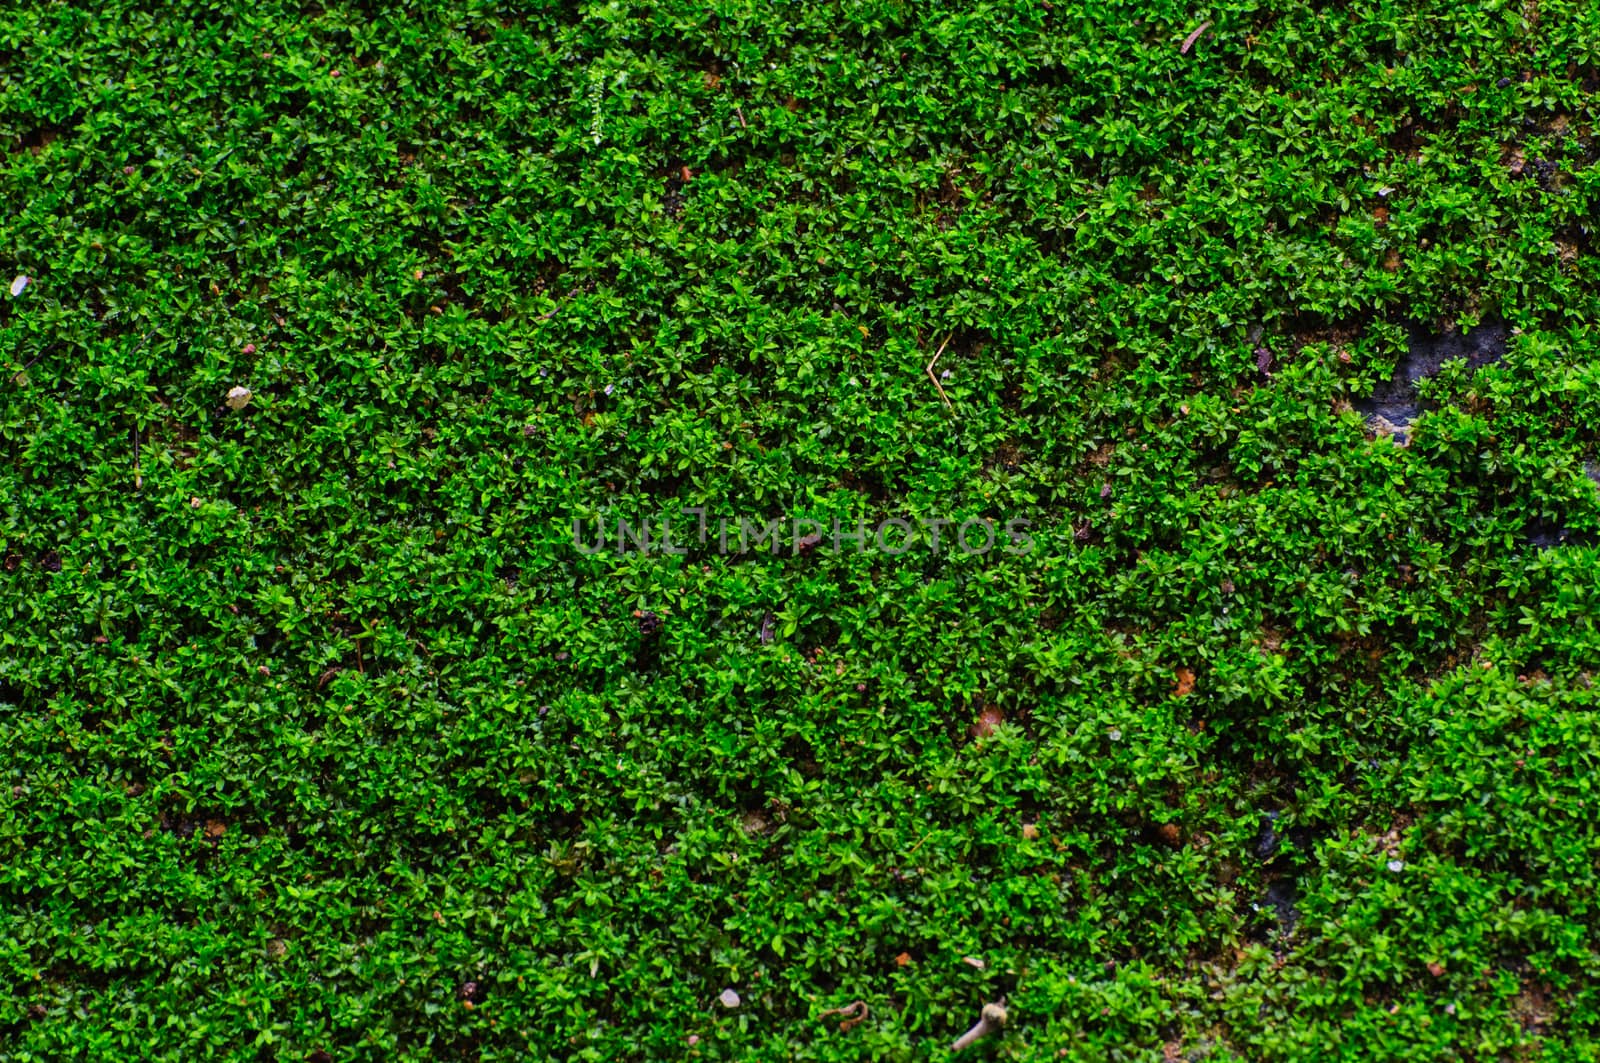 The green grass texture and background